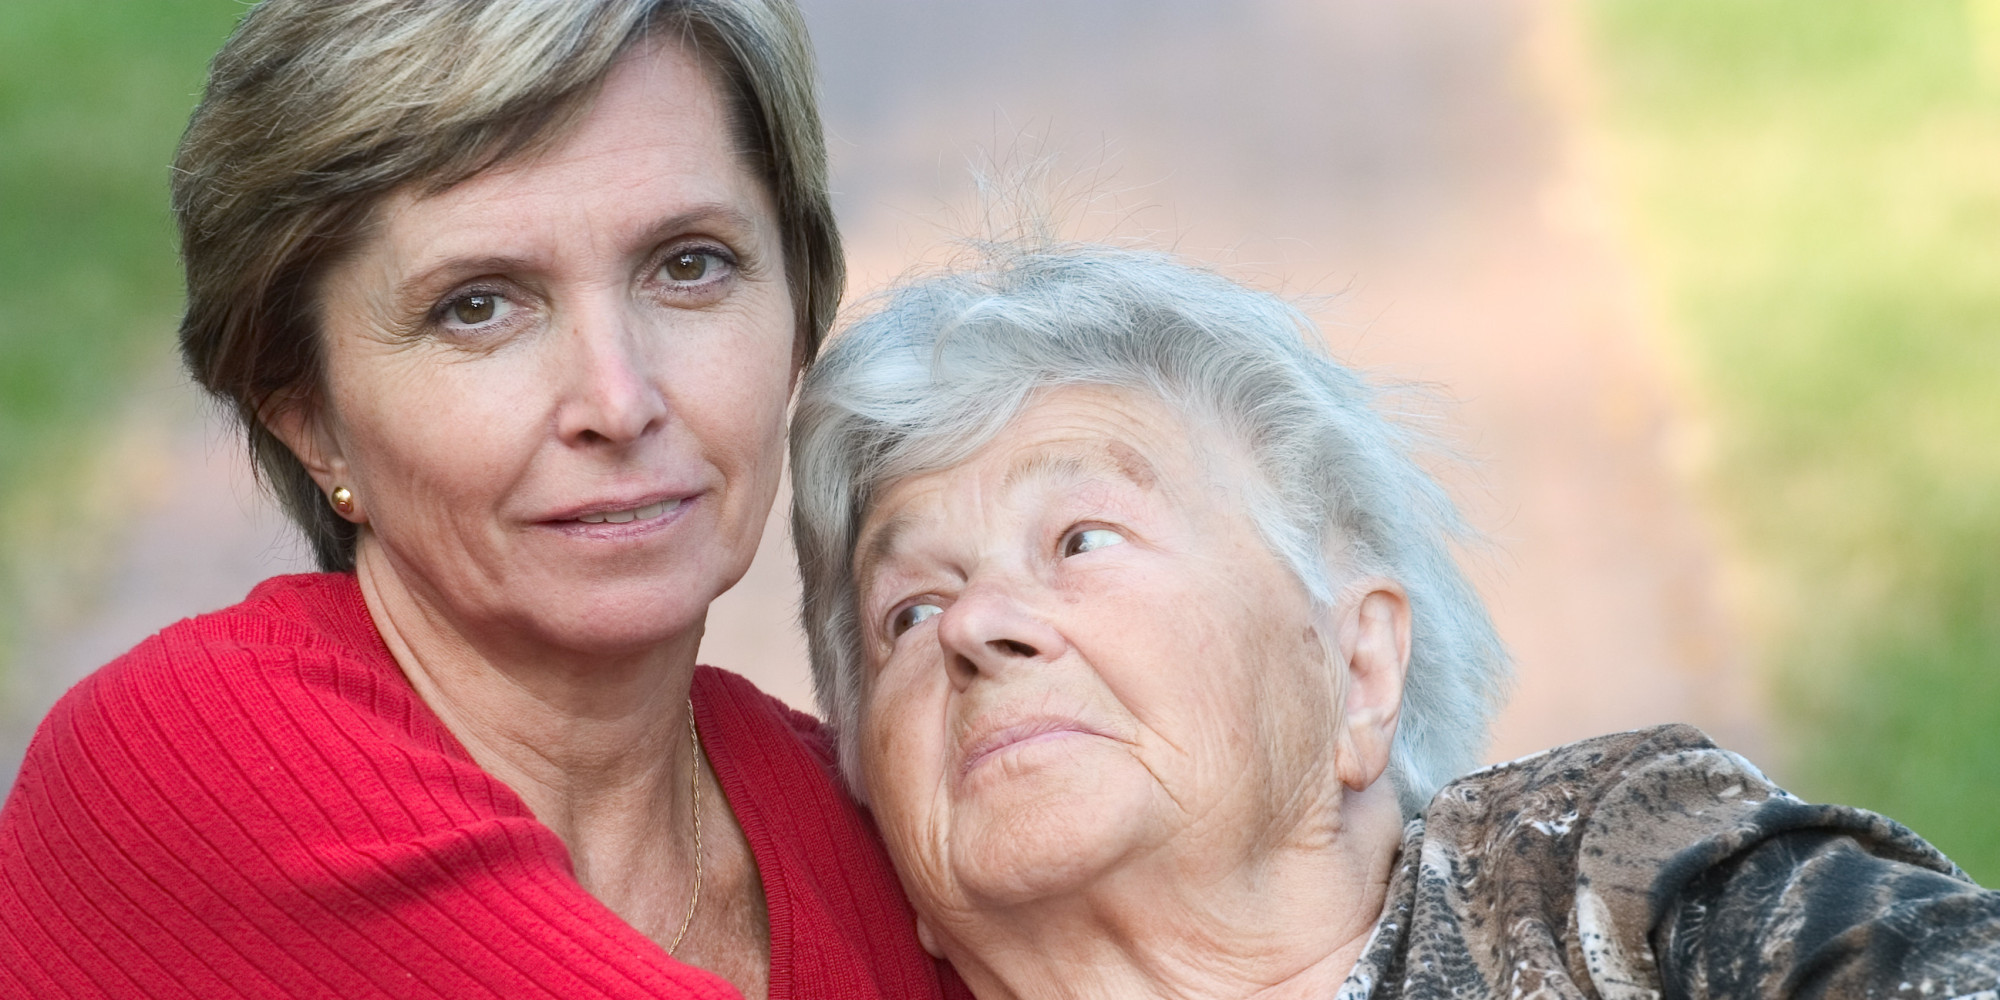 Caring For The Elderly And Aging